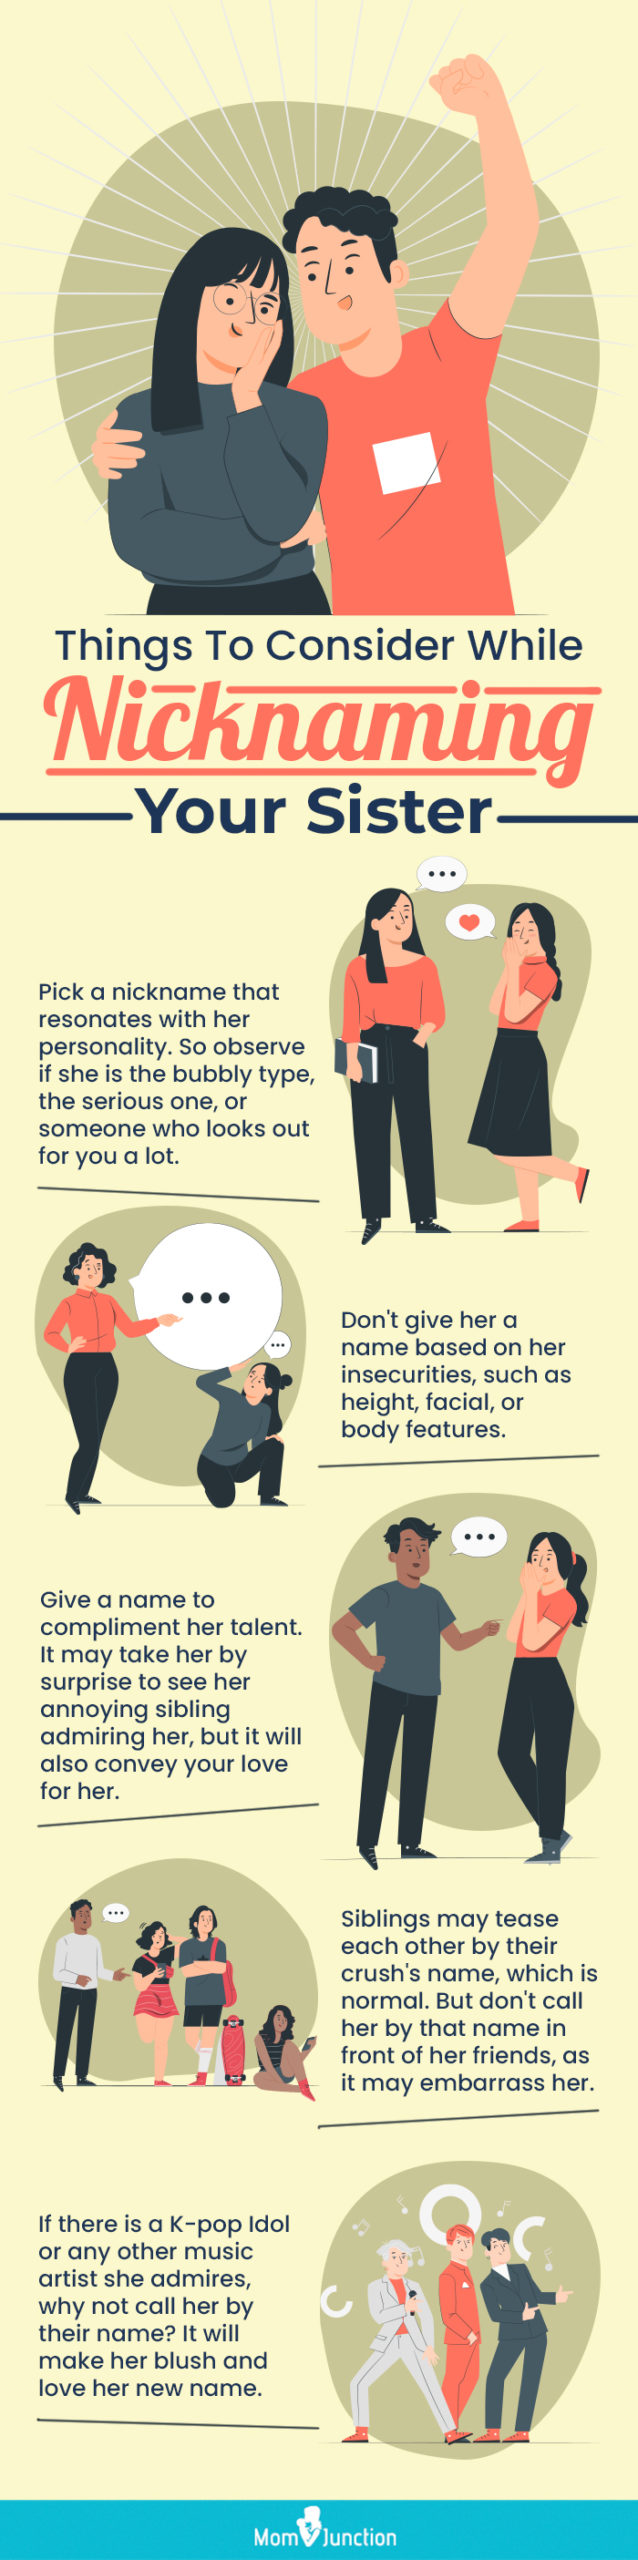 things to consider while nicknaming your sister [infographic]